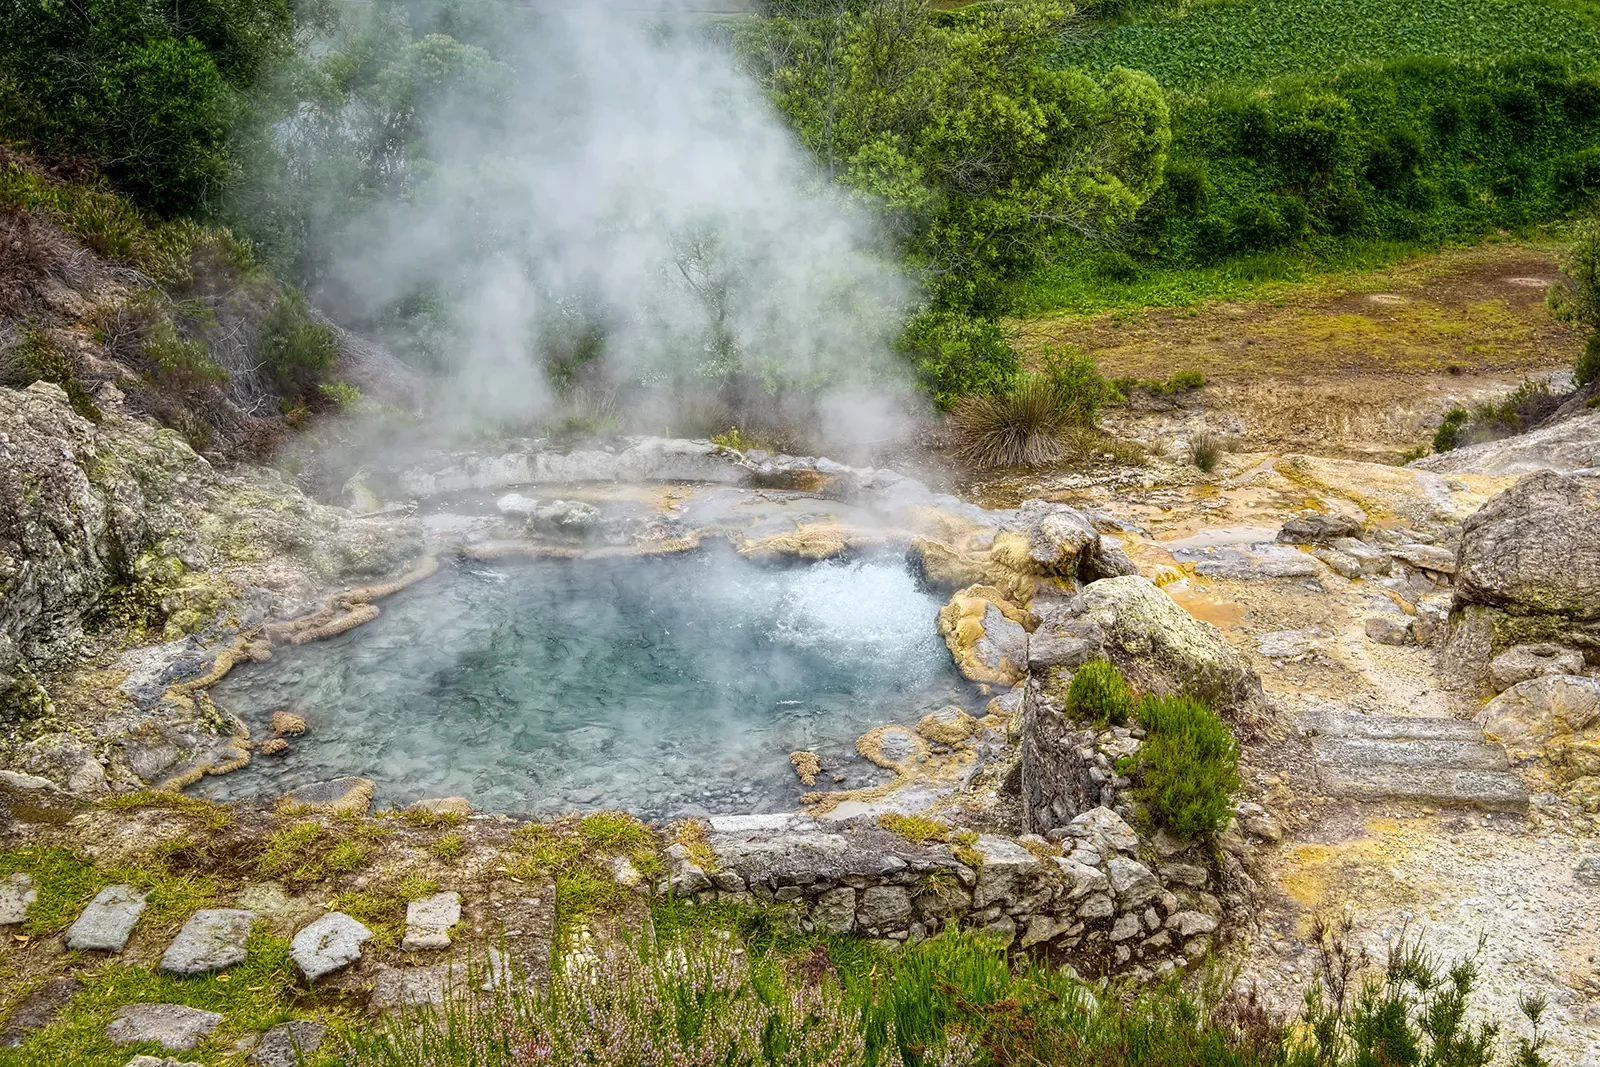 Natural geyser of boiling mineral water and evaporation, located at side of Furnas town on Sao Miguel island of Azores, Portugal.